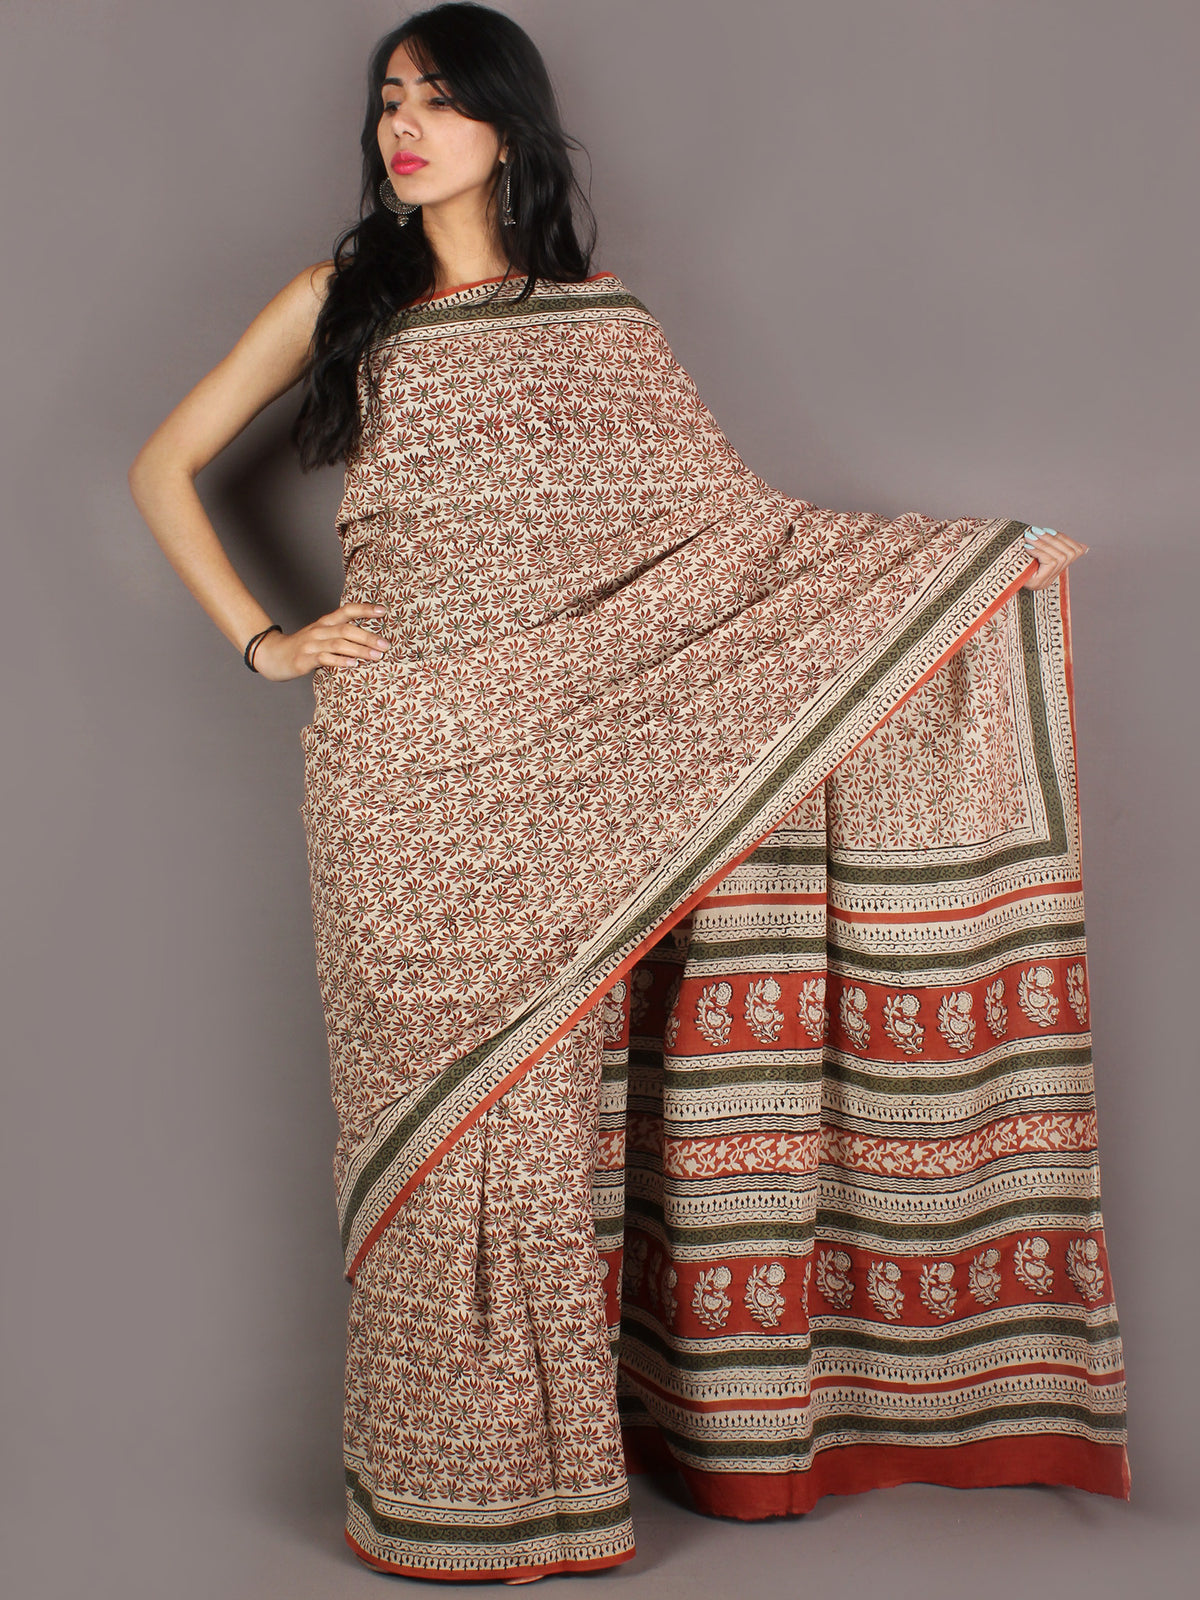 Ivory Green Maroon Hand Block Printed in Natural Colors Cotton Mul Saree - S03170947